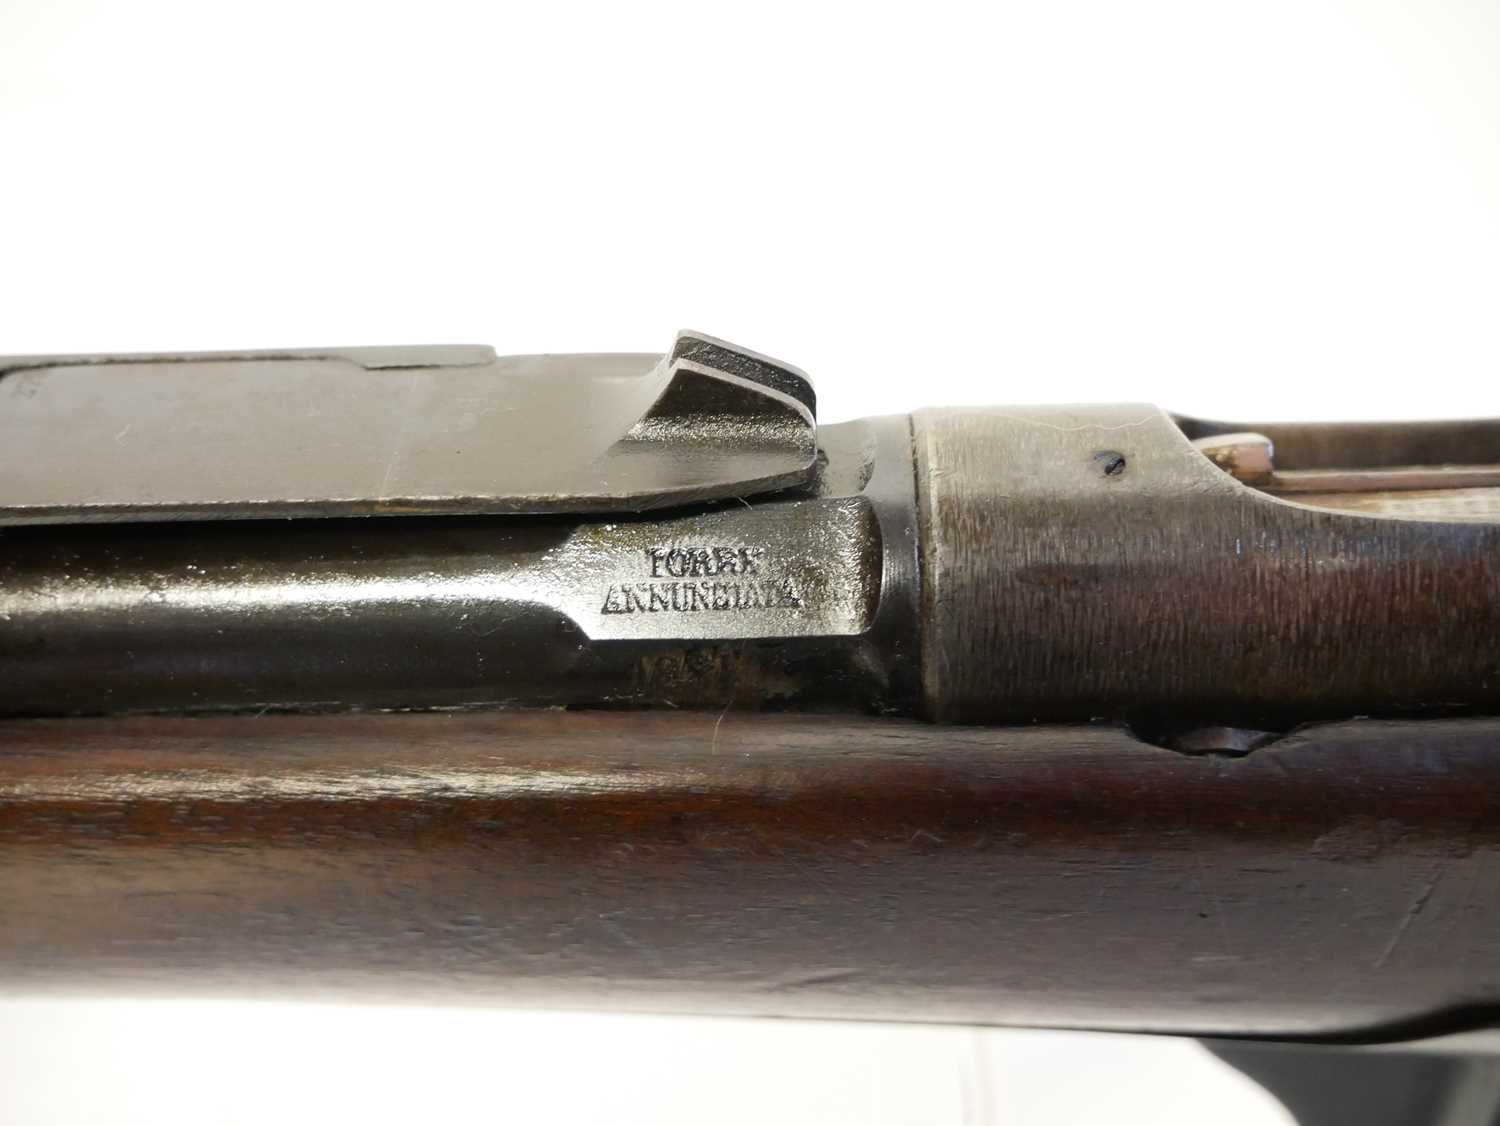 Italian Vetterli M.1870/87 10.35x47R bolt action rifle, serial number 5778, 33.5inch barrel fitted - Image 15 of 17